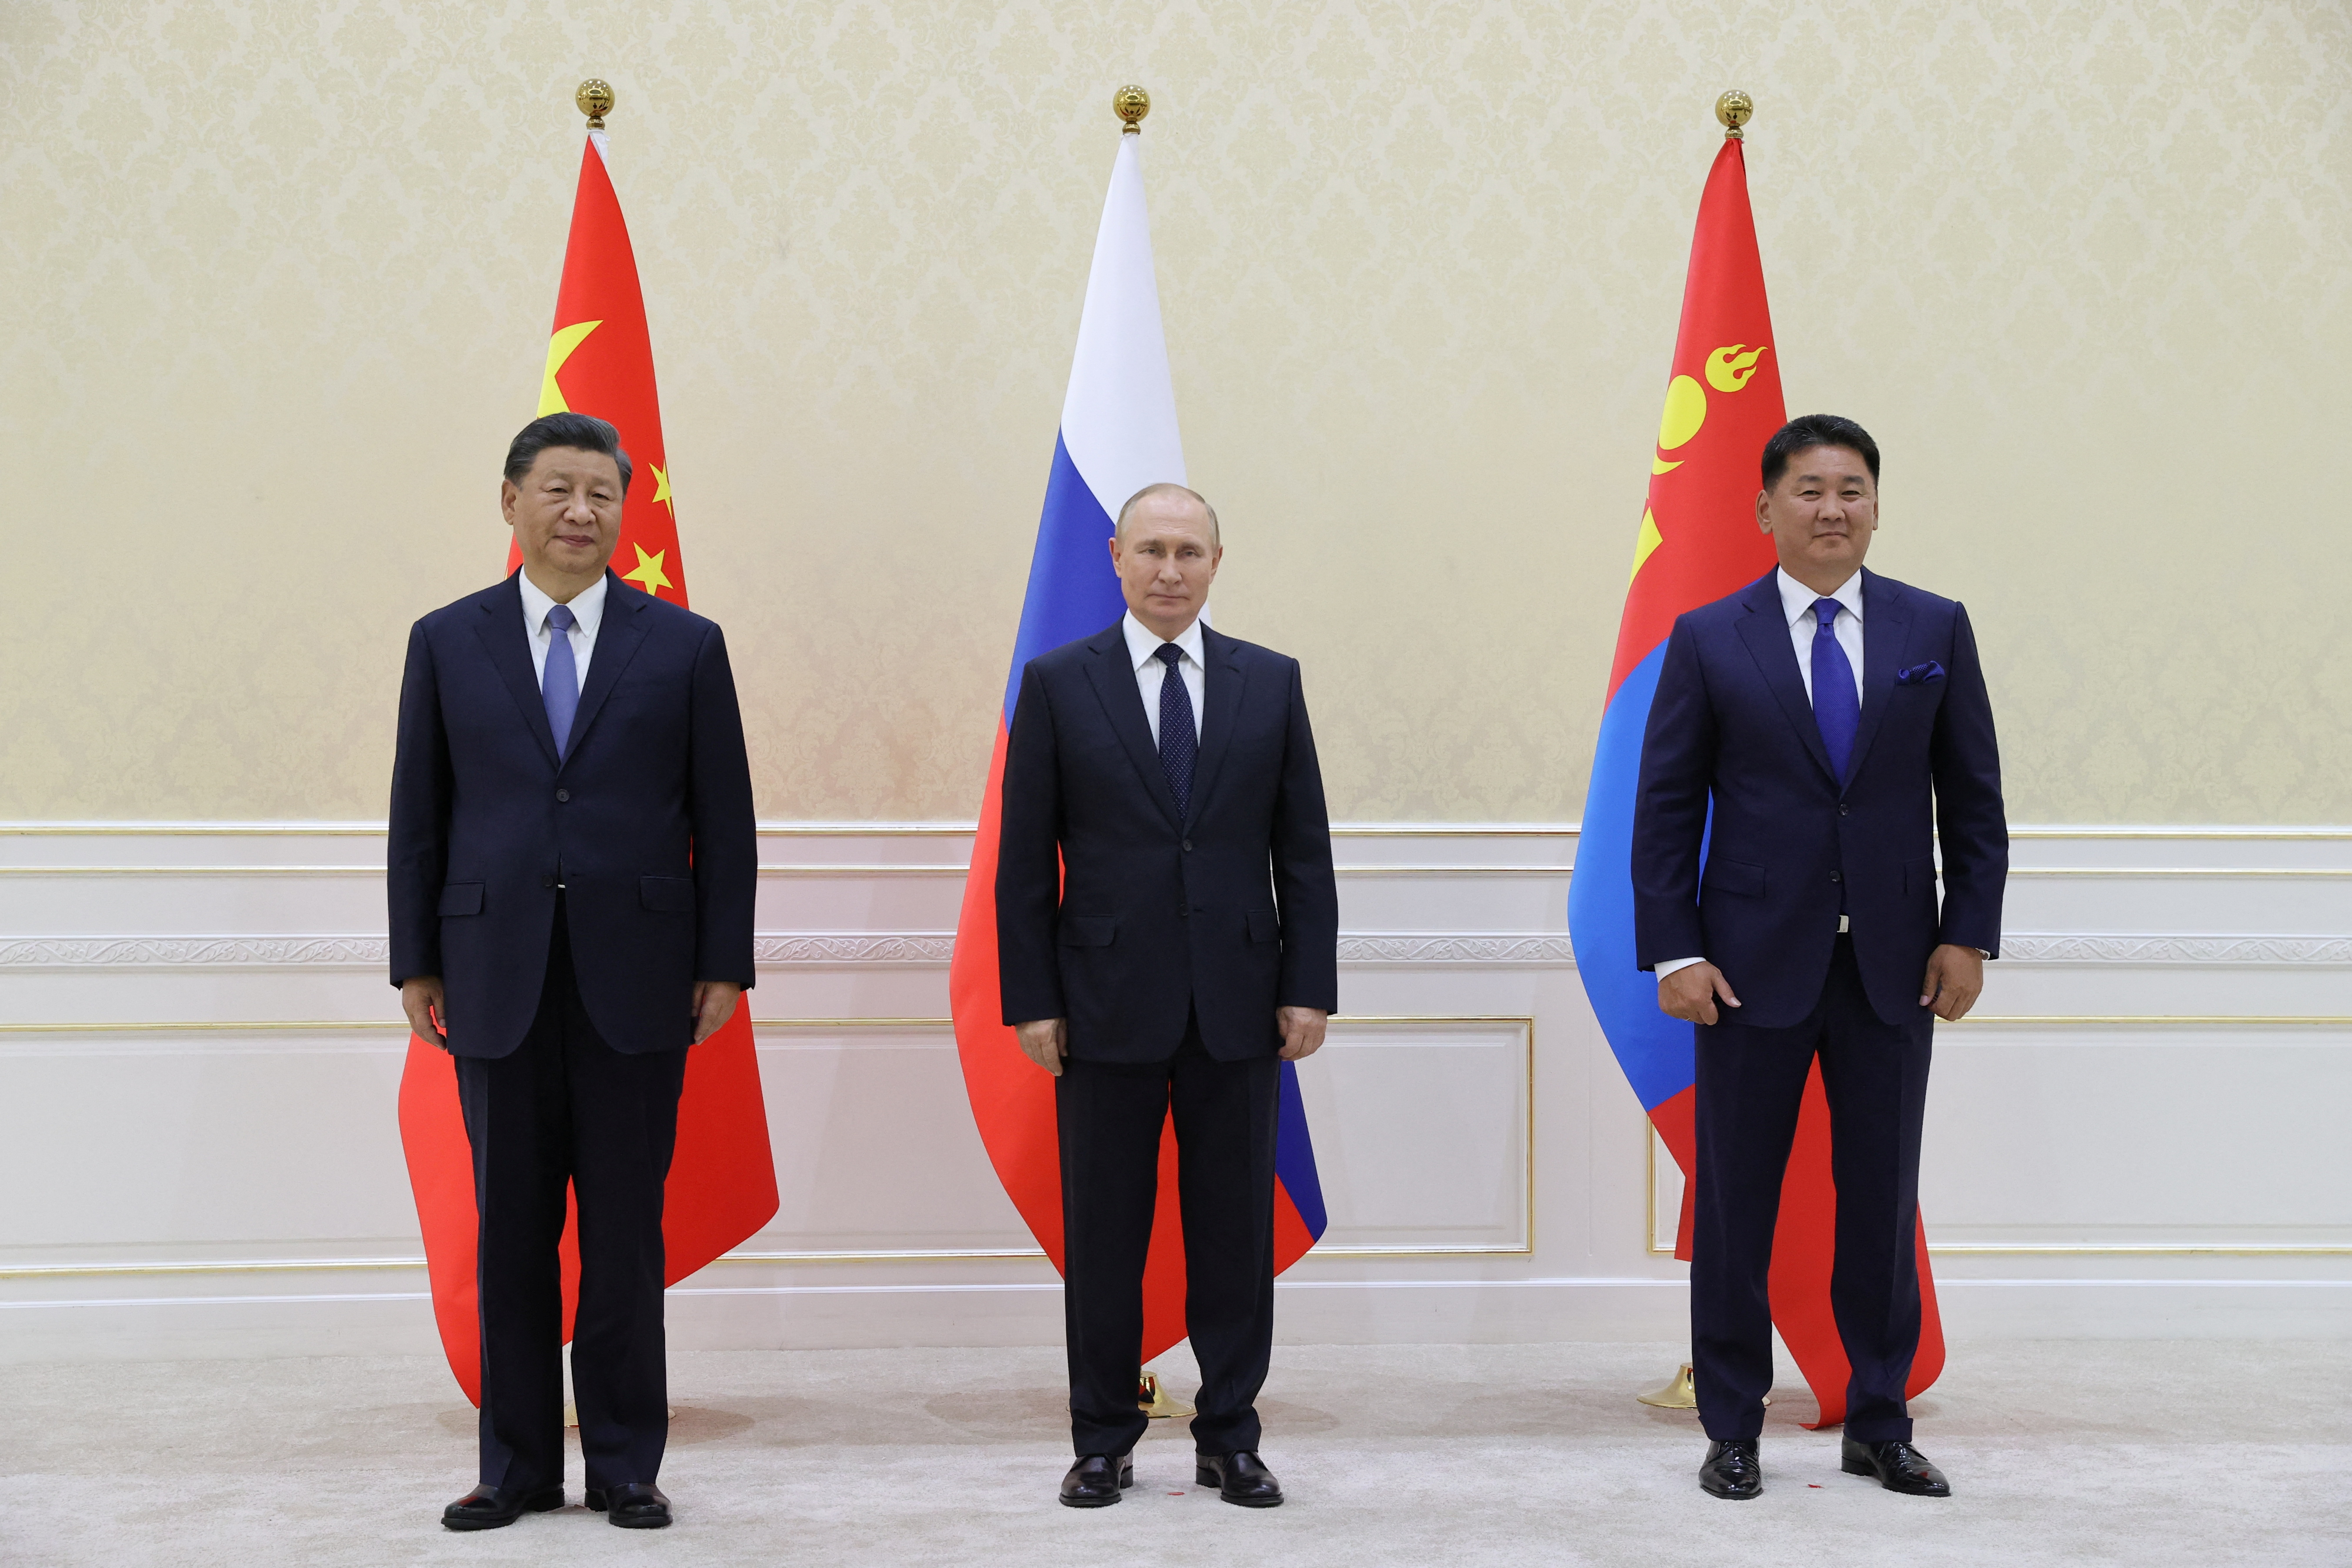 Russian President Vladimir Putin meets with Chinese President Xi Jinping and Mongolian President Ukhnaa Khurelsukh in Samarkand